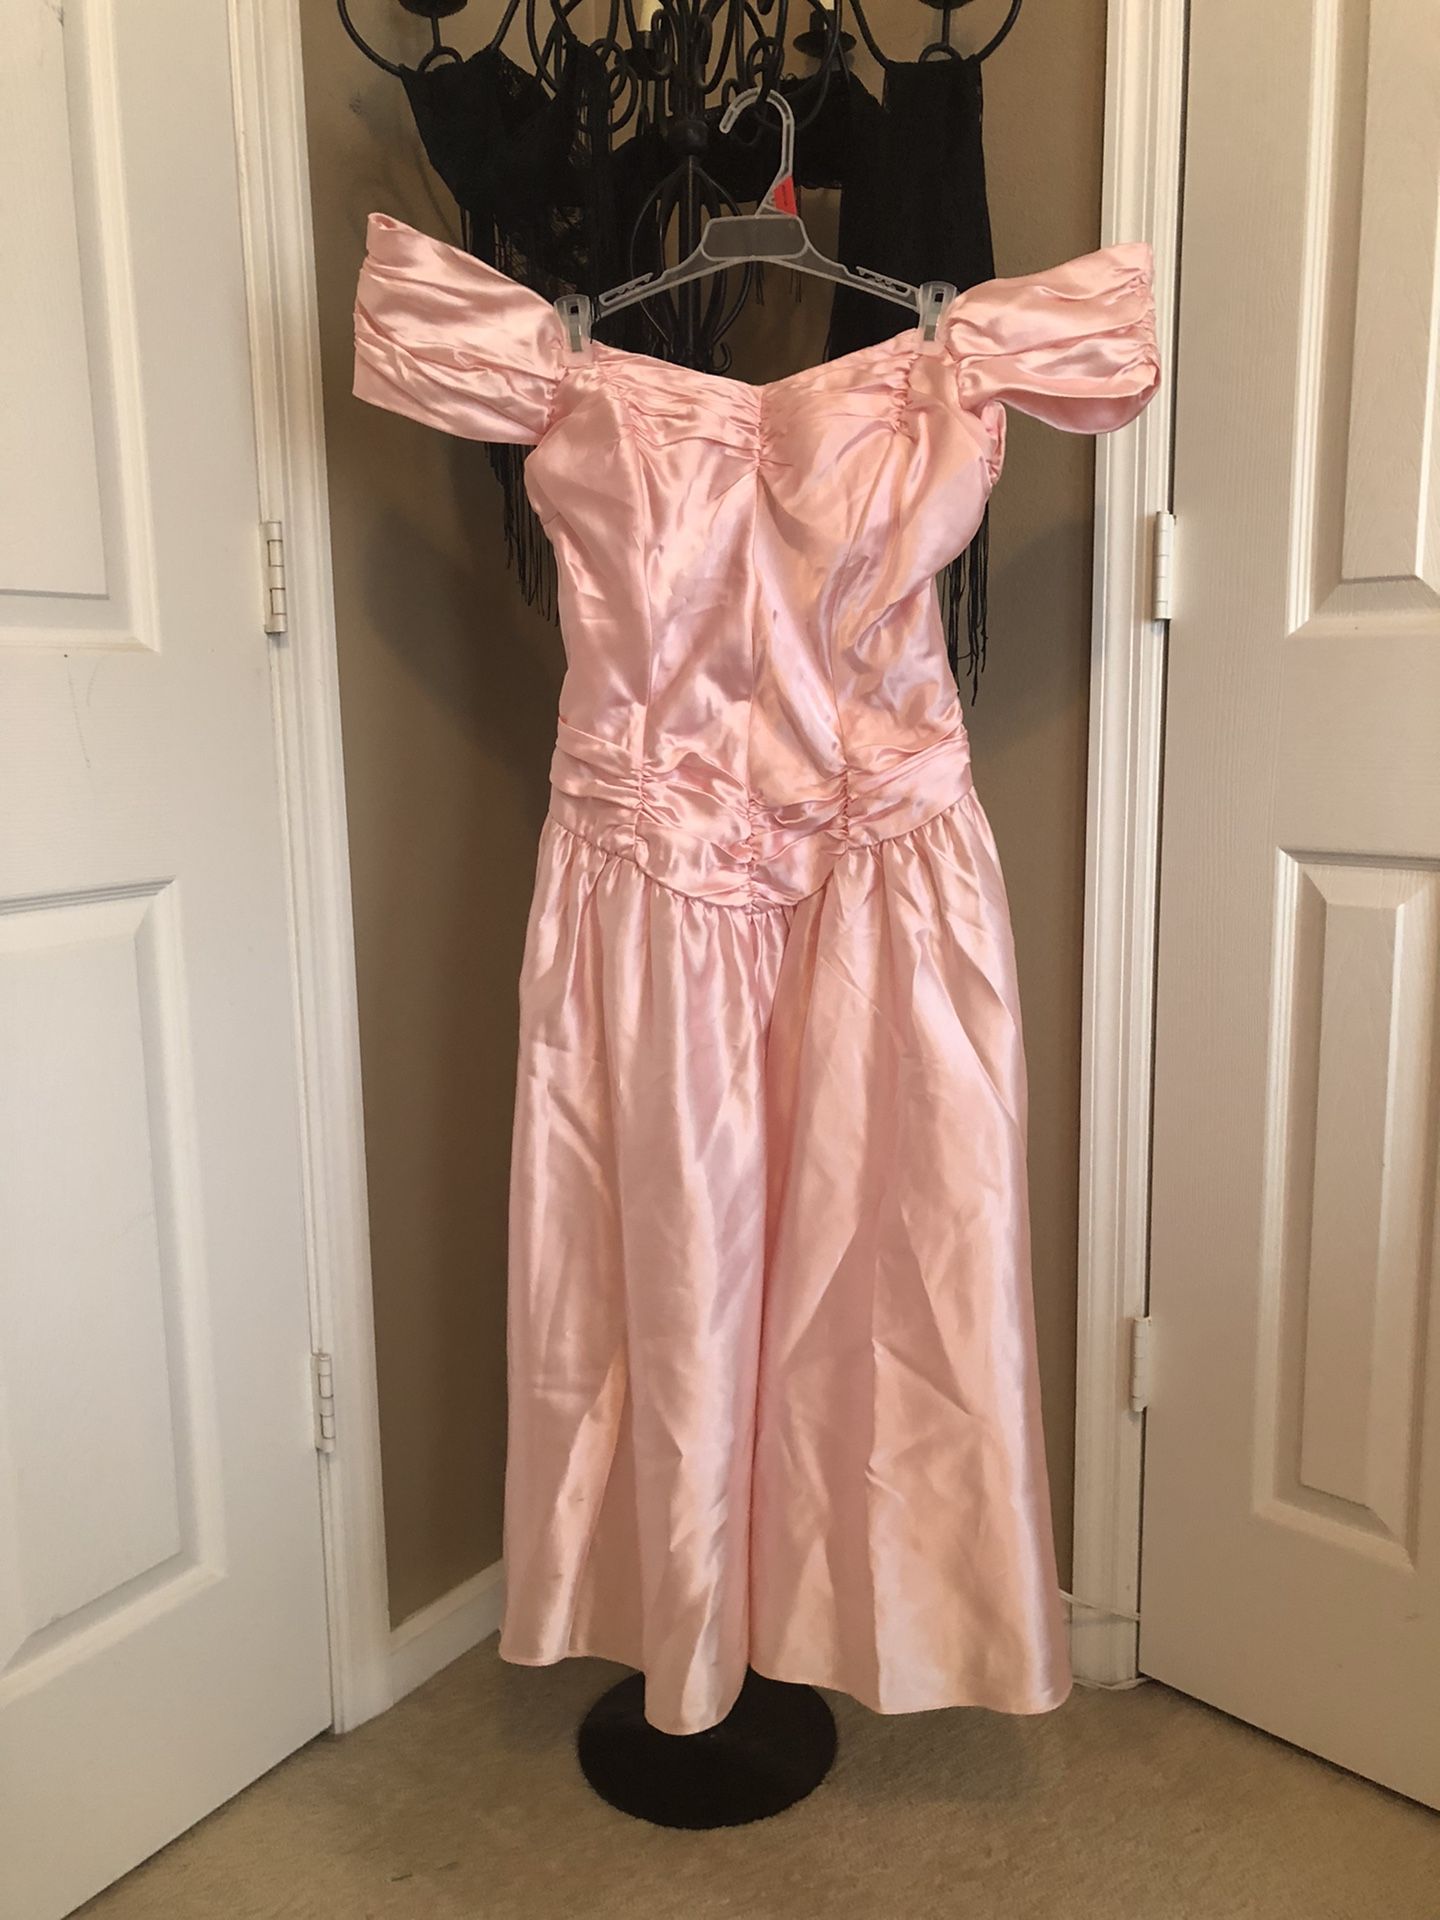 Halloween Costume “80s Prom/Pretty In Pink”